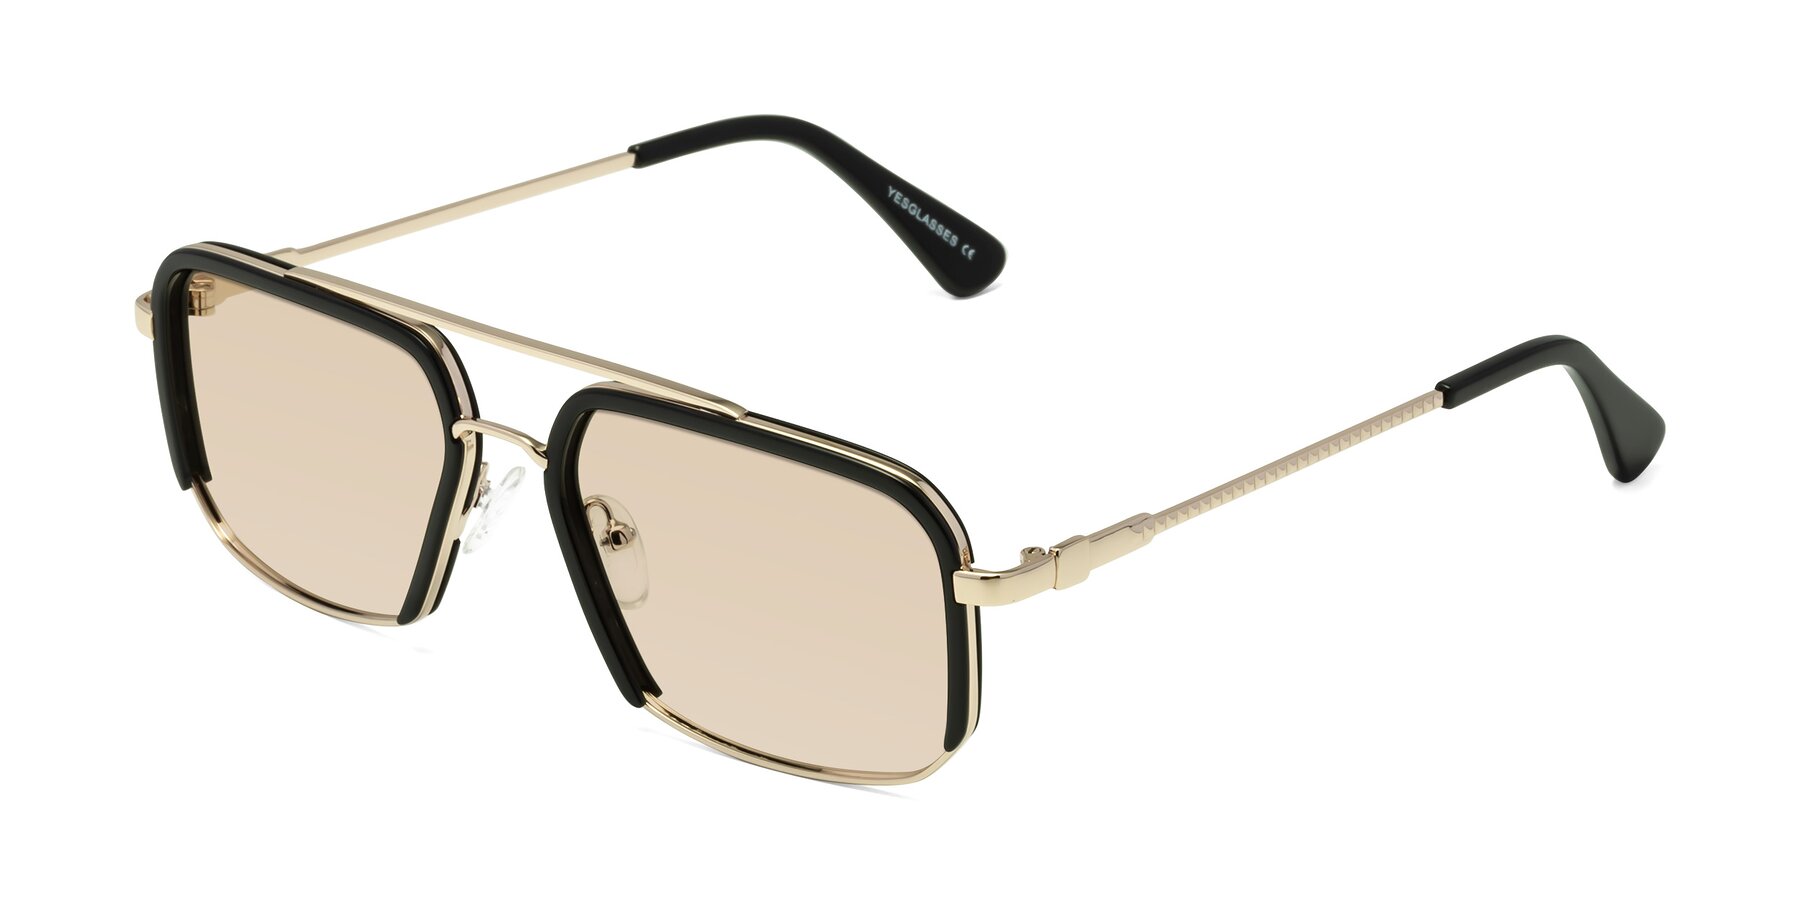 Angle of Dechter in Black-Gold with Light Brown Tinted Lenses